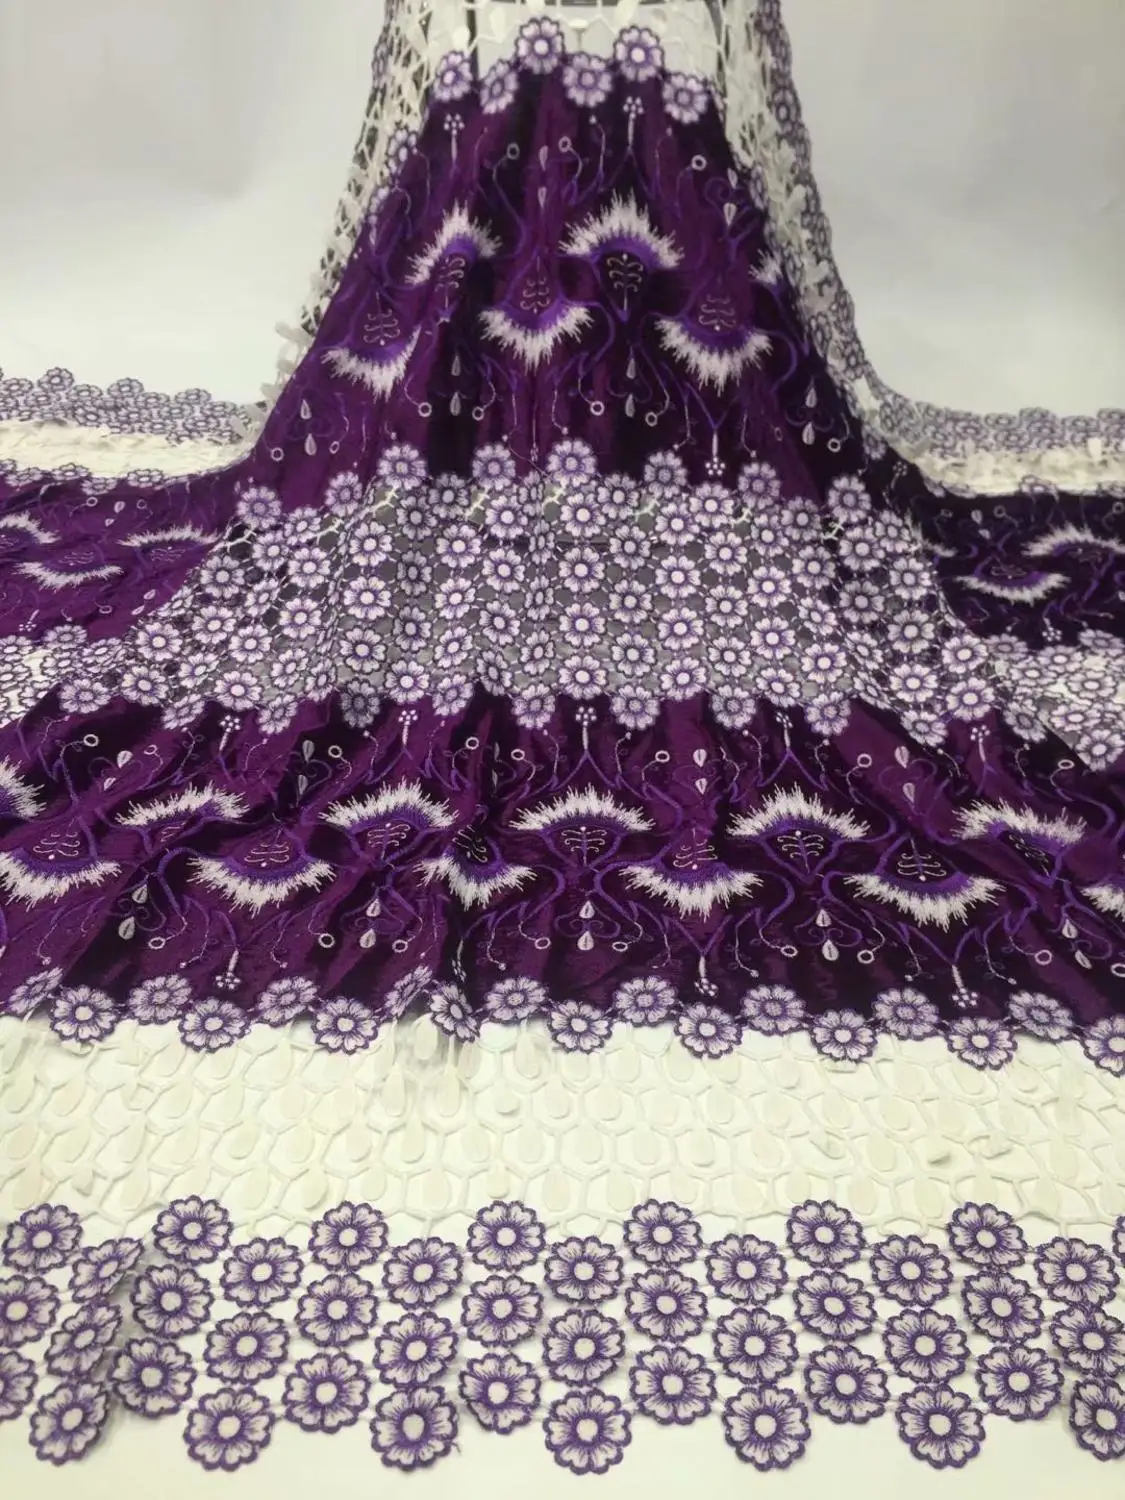 

Purple White African Lace Velvet Fabric With Guipure Border Sewing Crafts For Wedding Garment Dress